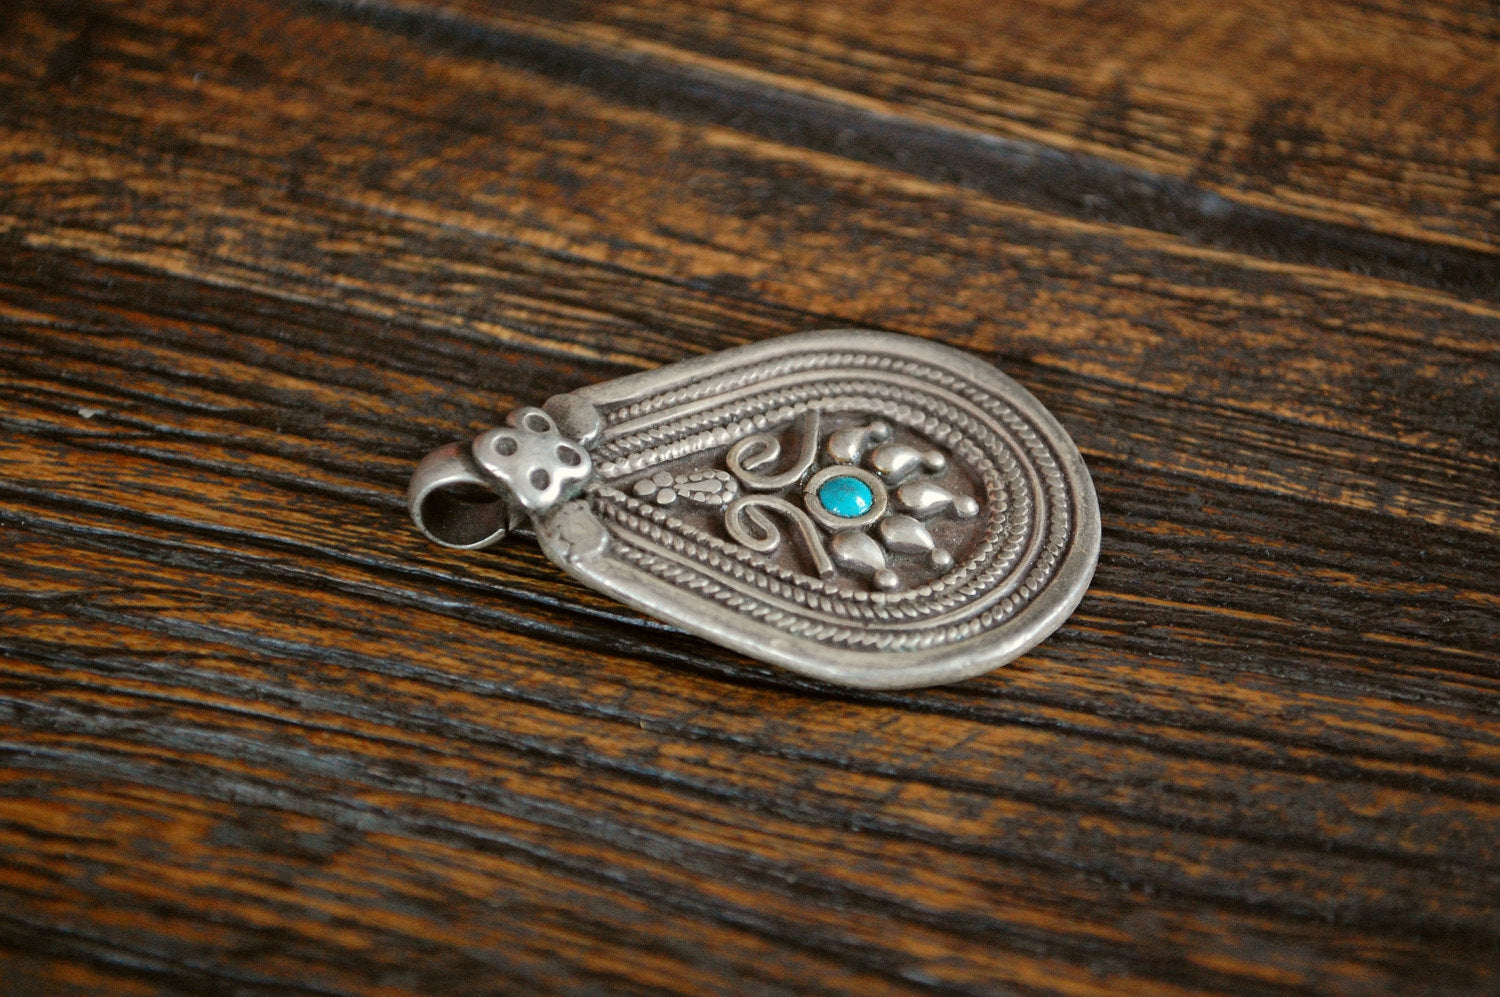 Tribal Indian Silver Pendant with Turquoise - Tribal Rajasthan Silver Amulet - Ethnic Tribal Indian Pendant - Gypsy Silver Pendant